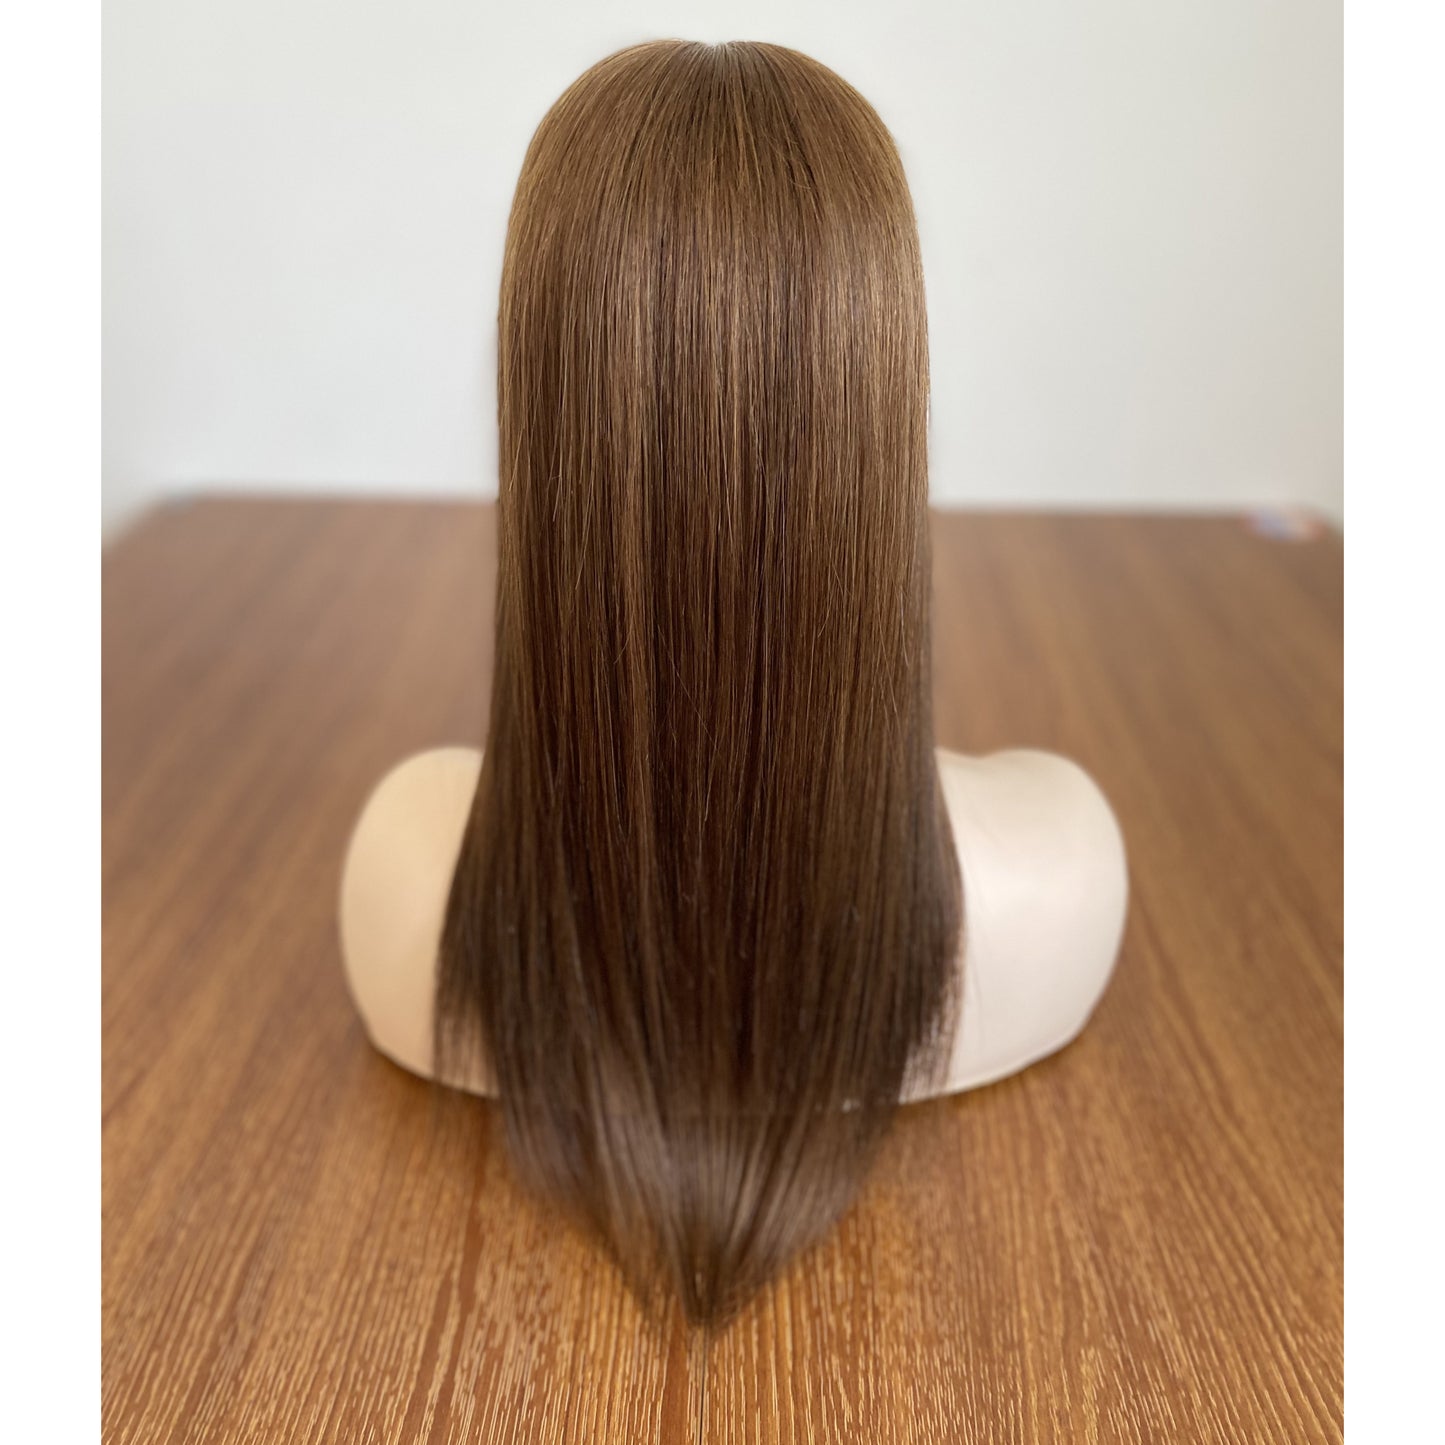 silk base topper with weft back colorful women topper wig human hair straight wig